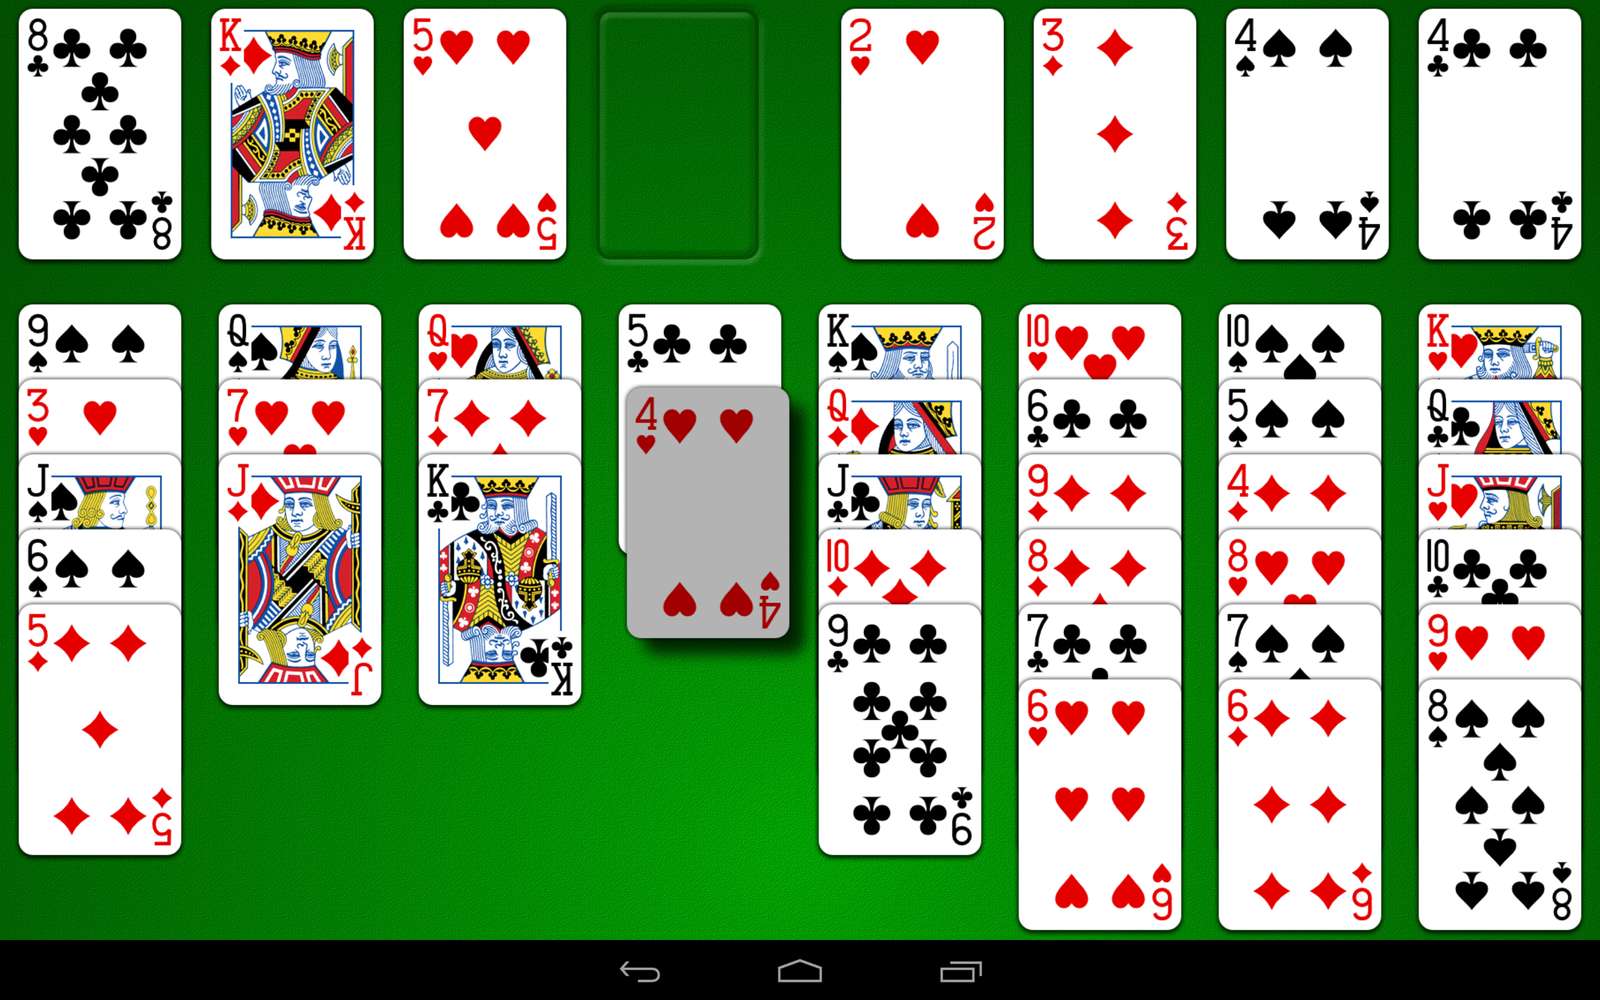 who is the creator of the original freecell game